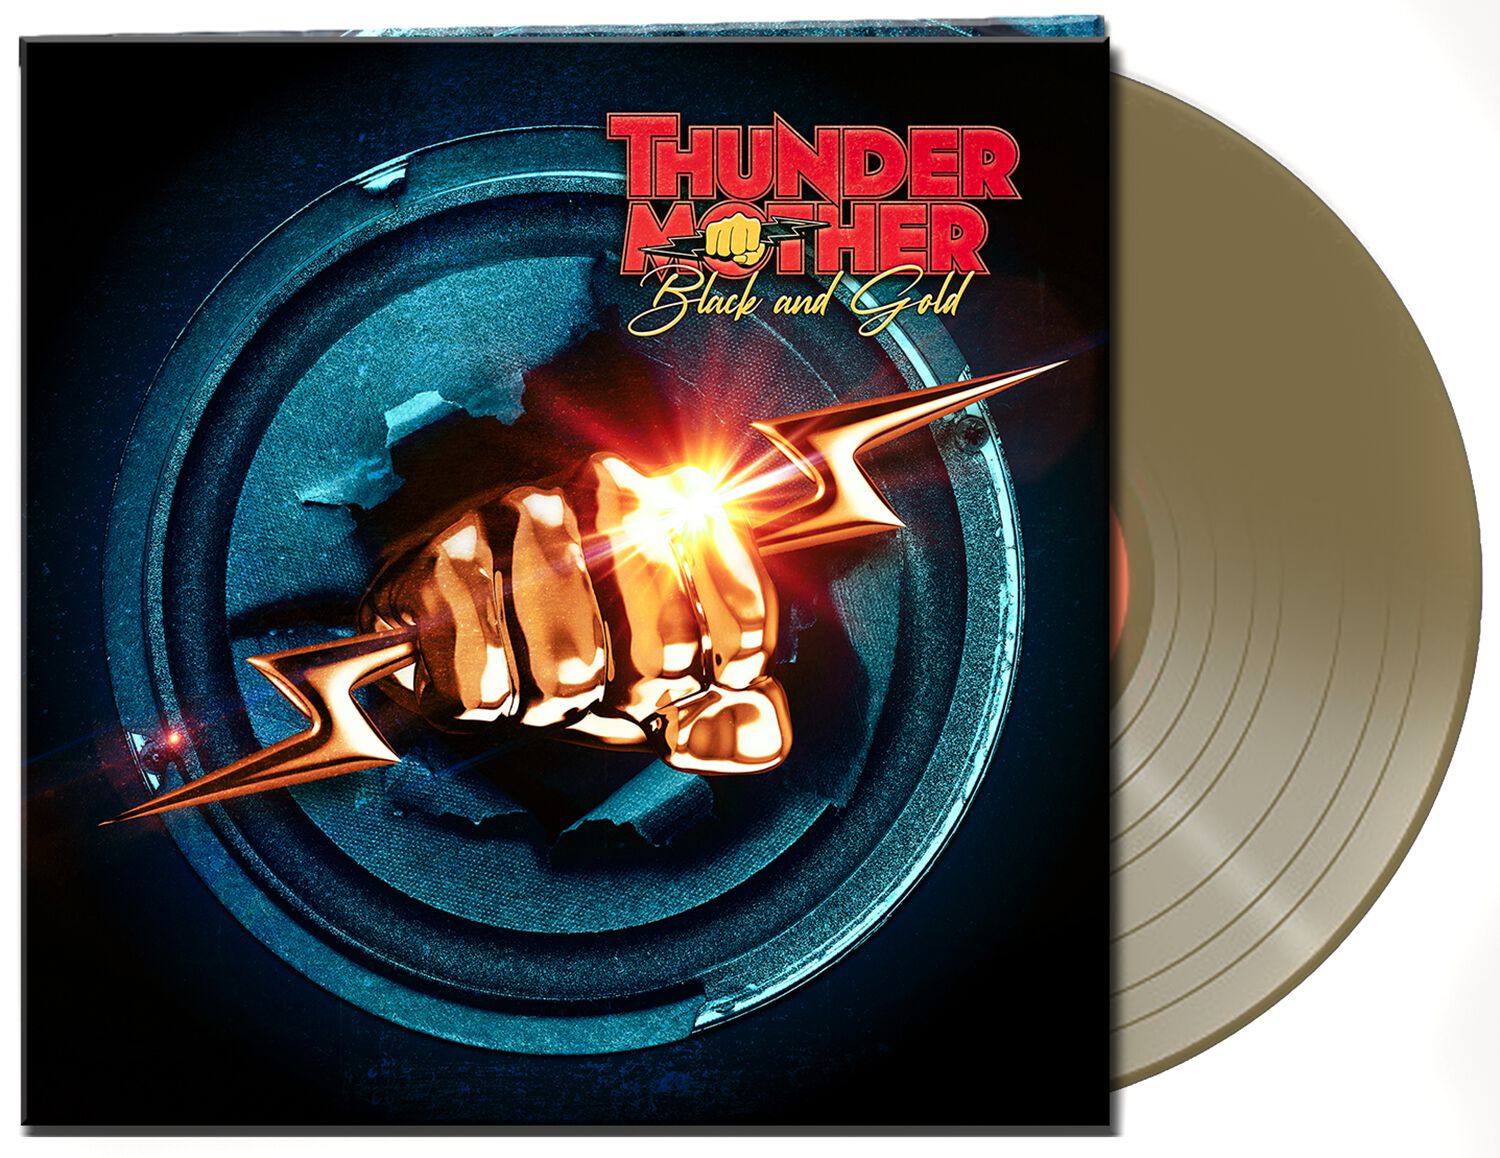 Black and gold von Thundermother - LP (Coloured, Gatefold, Limited Edition)